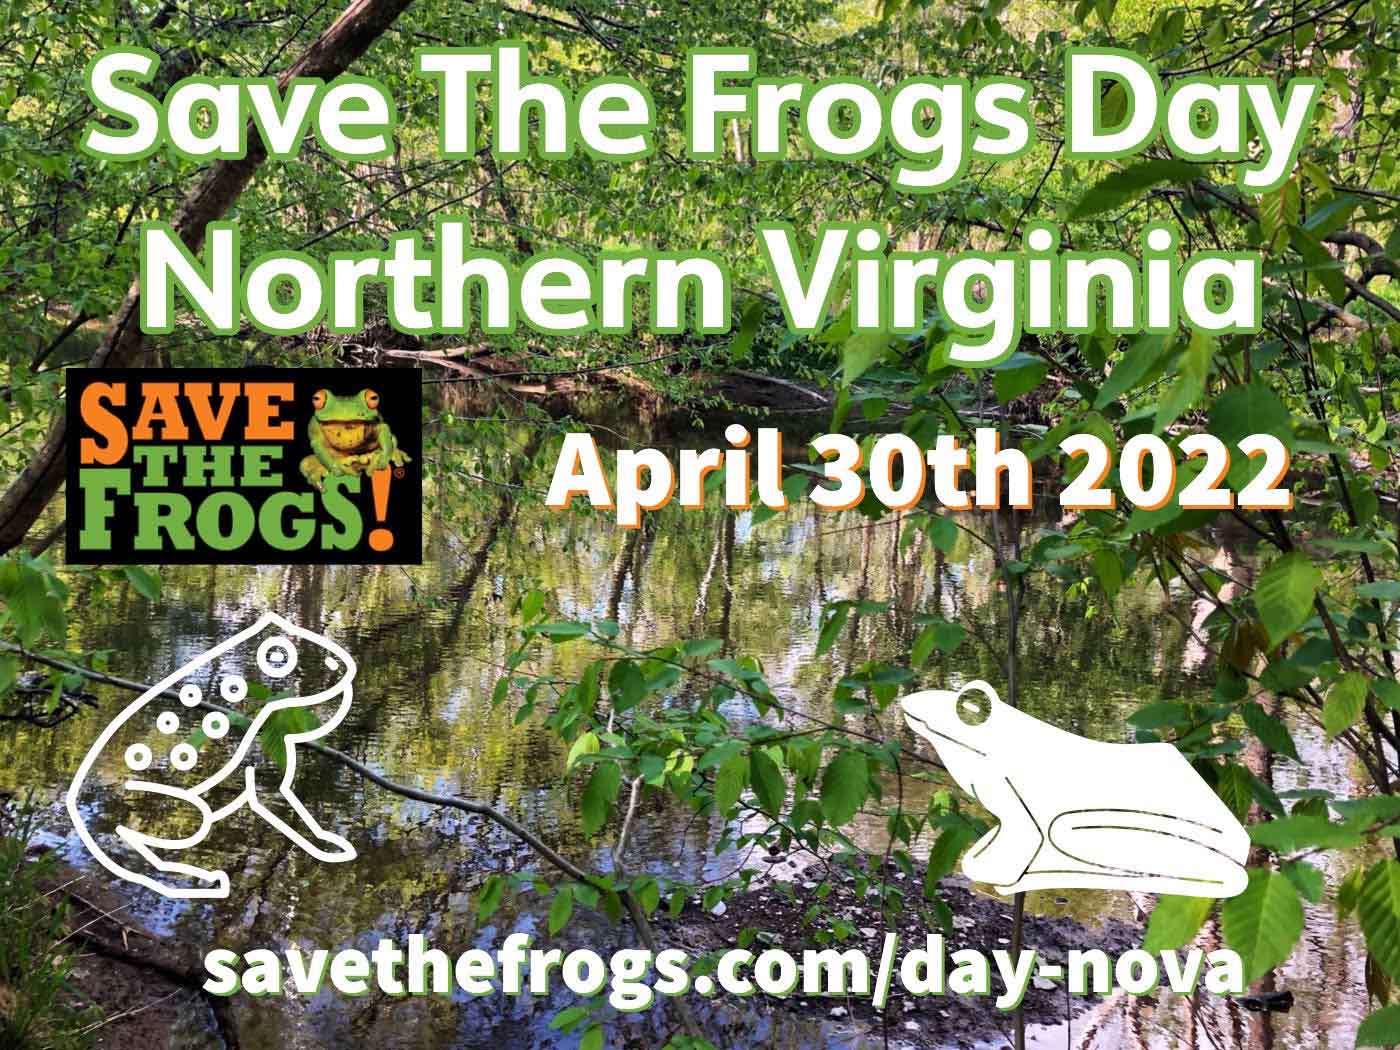 Save The Frogs Day 2022 Northern Virginia Kerry Kriger